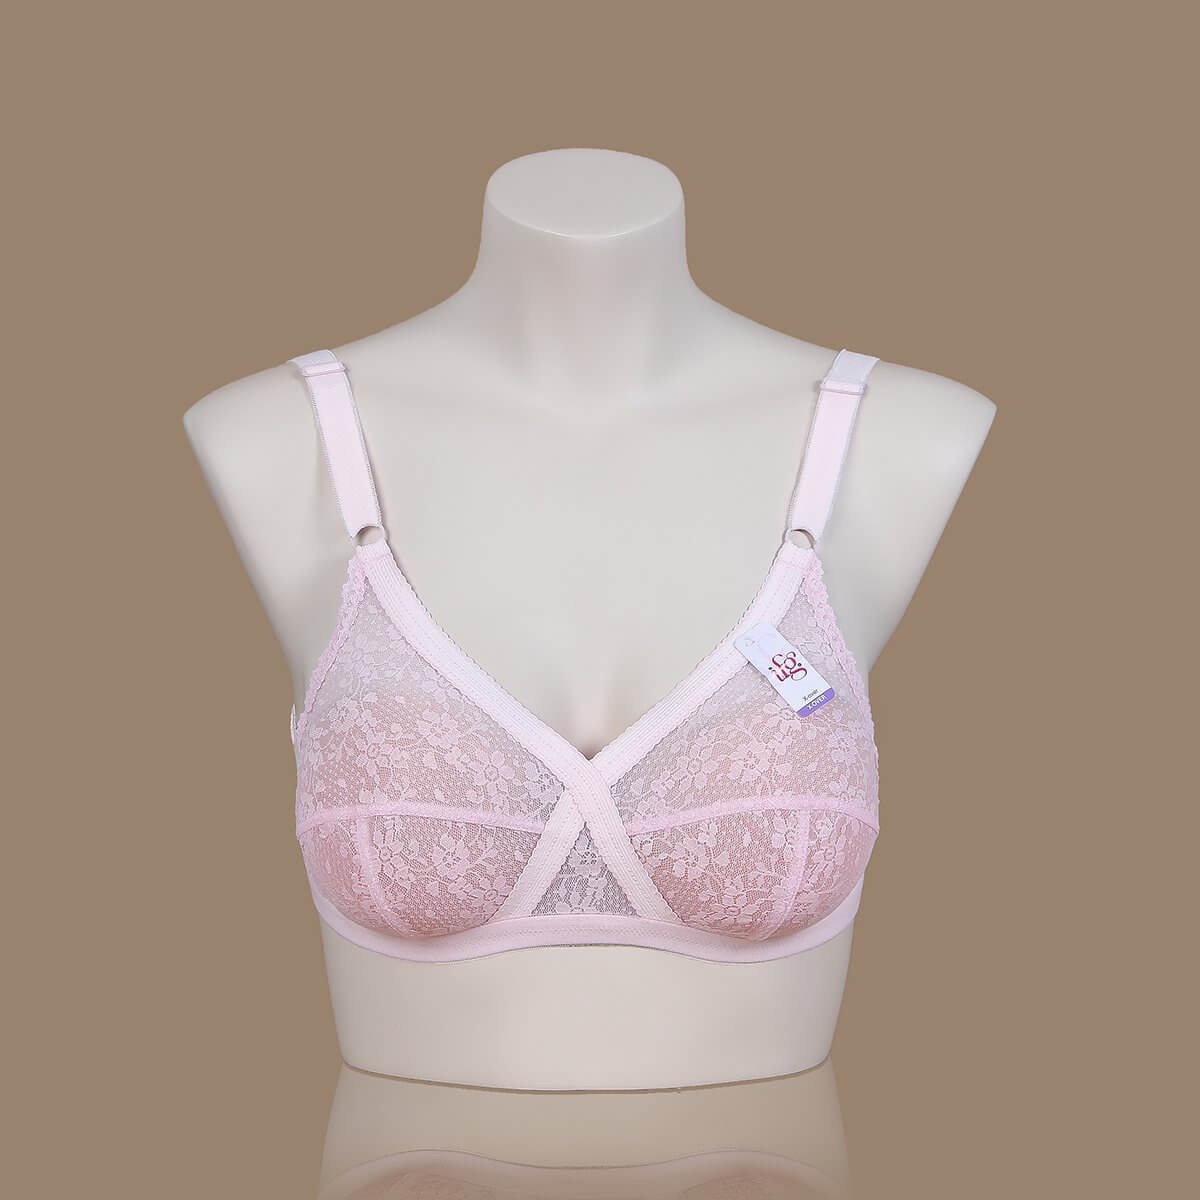 100% ORIGINAL IFG BRA X OVER NON PADDED WITH NET( Foam + Cotton )/ BEST  CHOICE FOR SUMMER/ BEST FOR WOMEN AND GIRLS